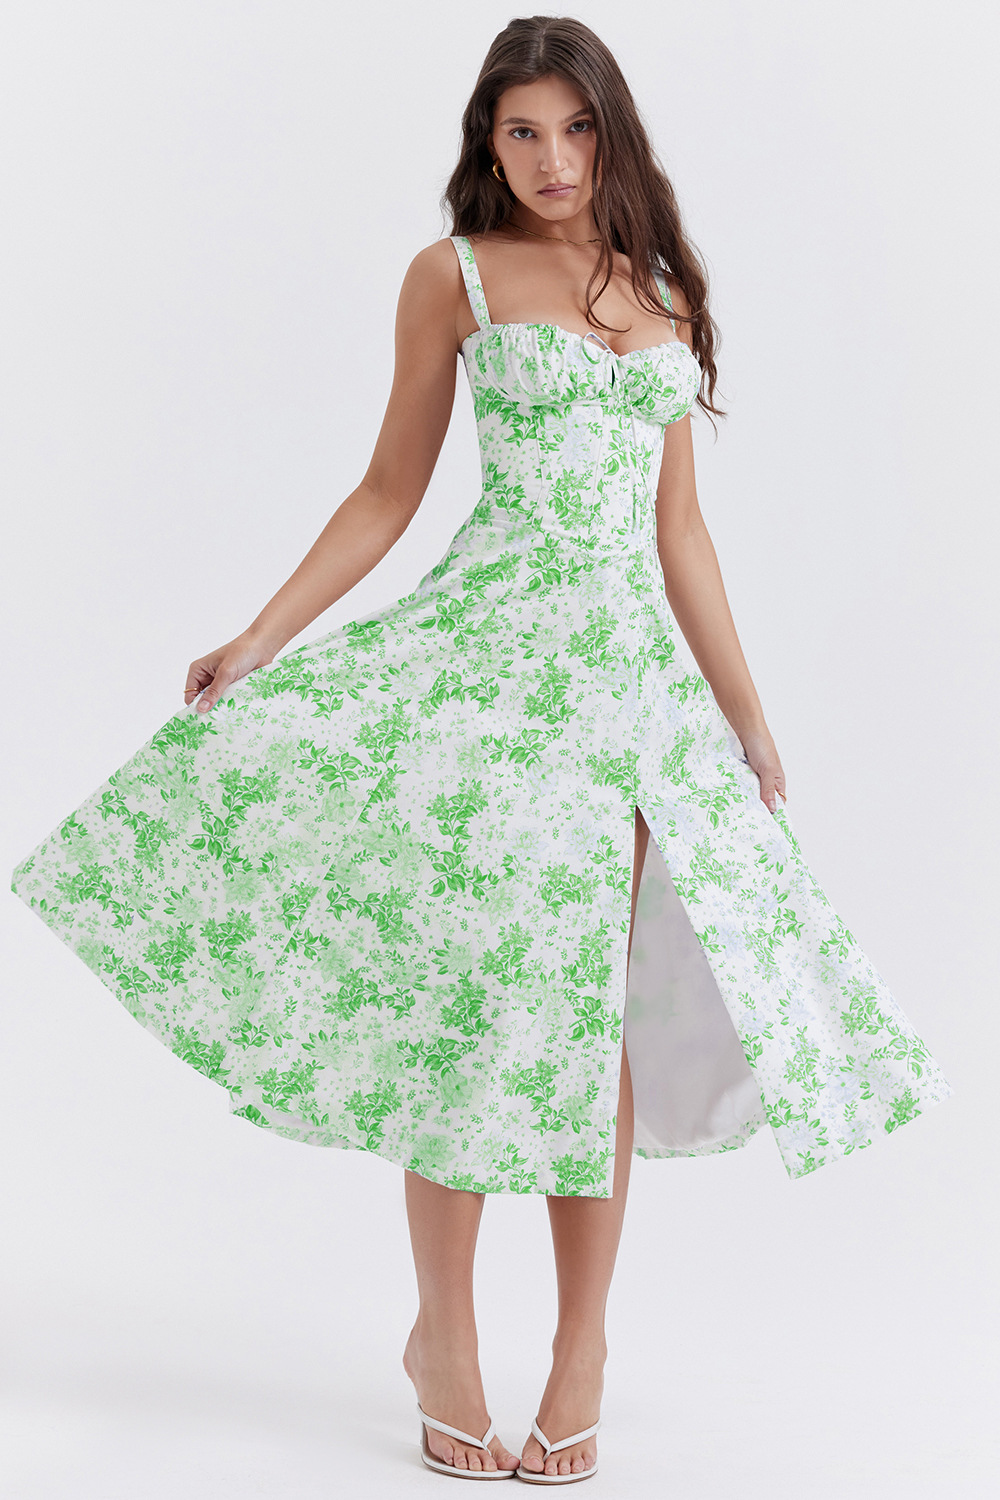 👗Comfortable Beauty-No underwire-Print Bustier Sundress😍Fits All Sizes Up To 4XL & 50% OFF